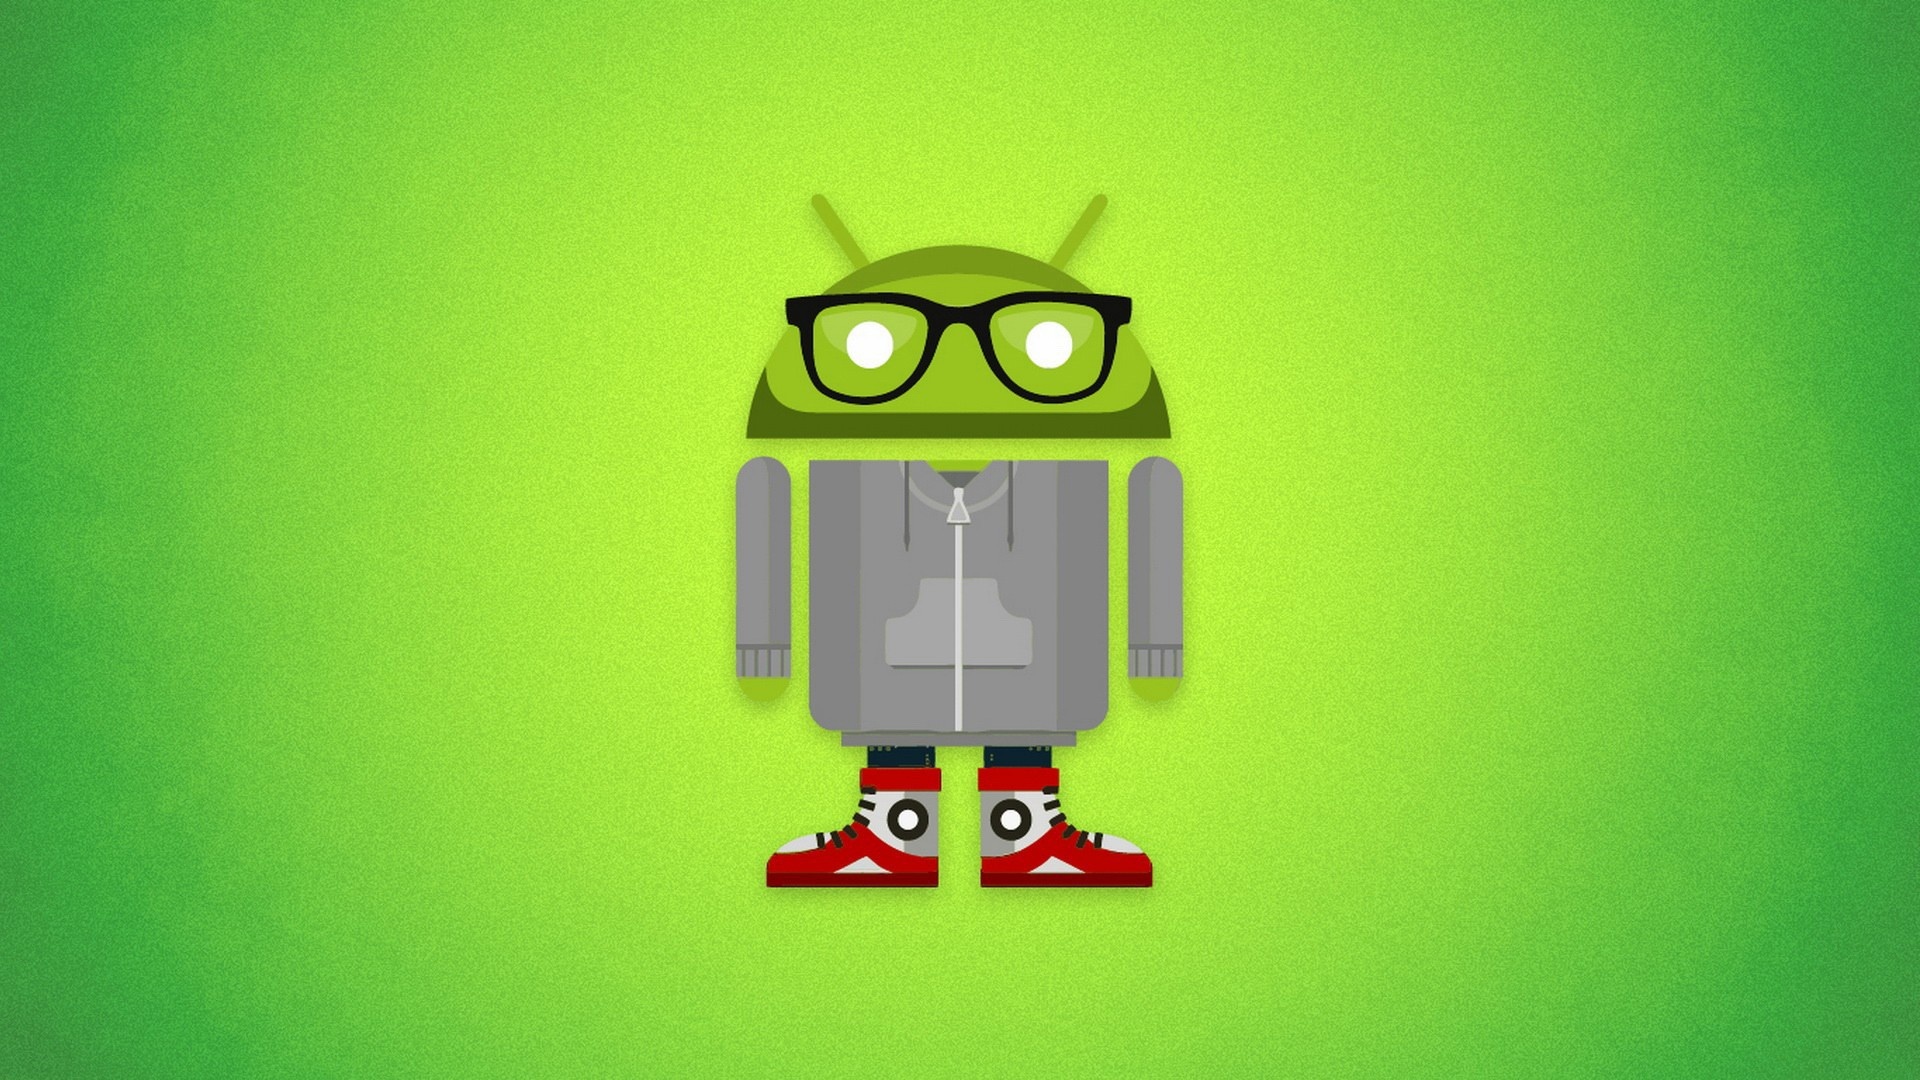 Cool Android Robot Wallpapers